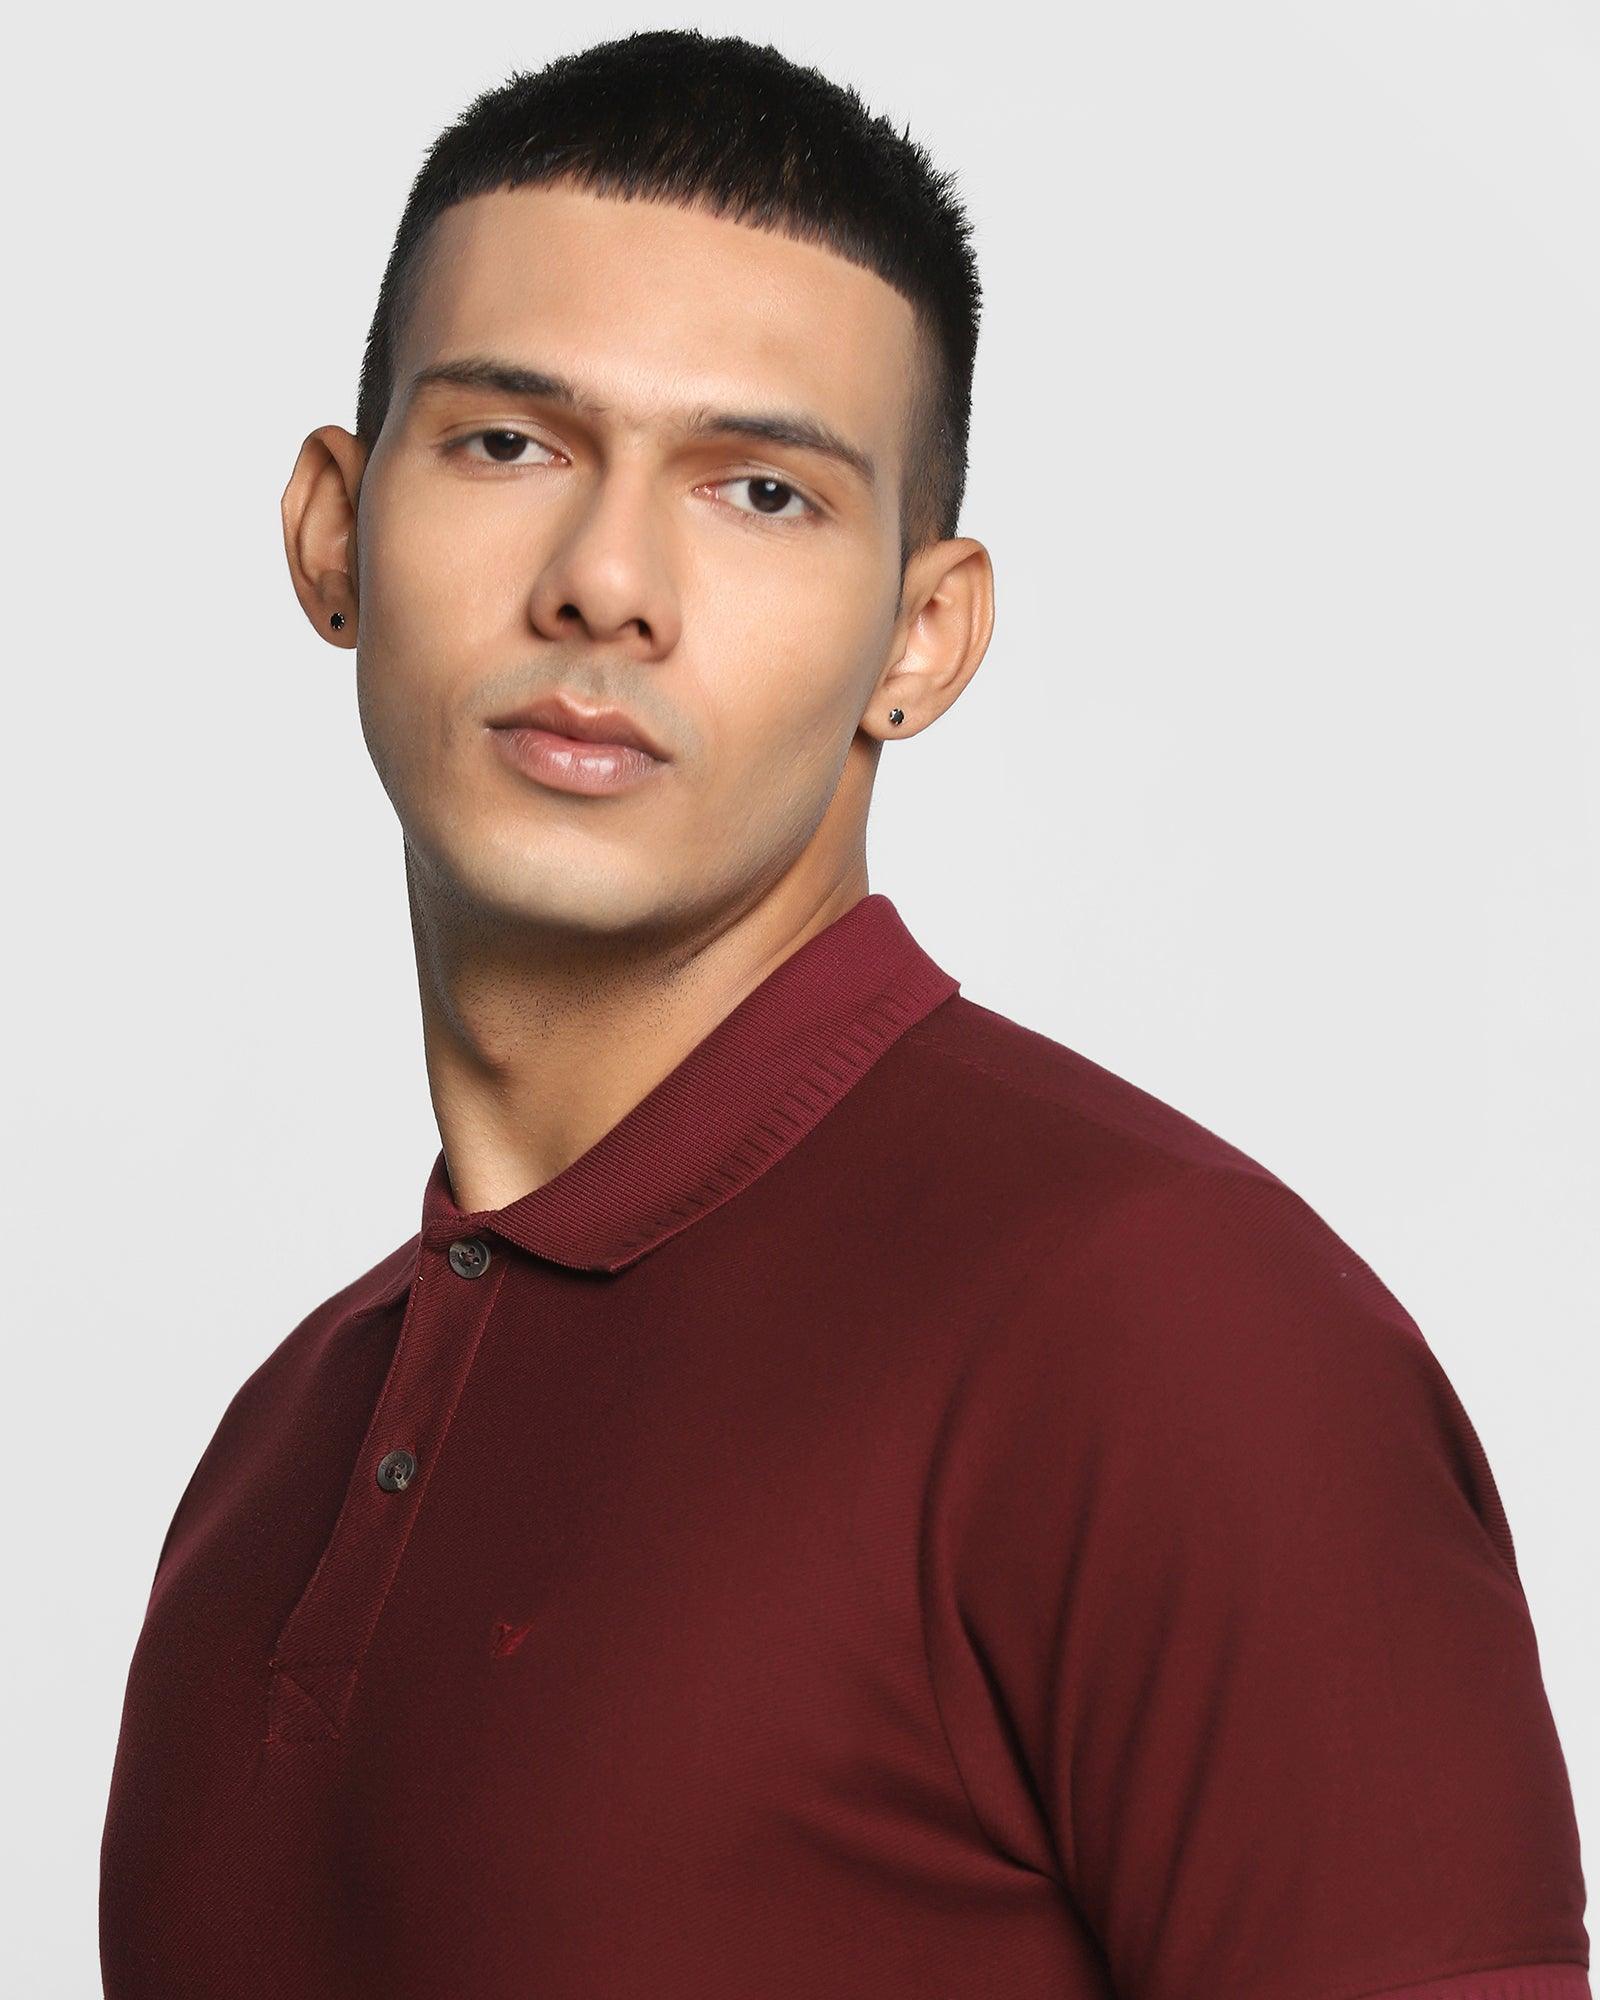 Polo Wine Solid T Shirt - Pipit